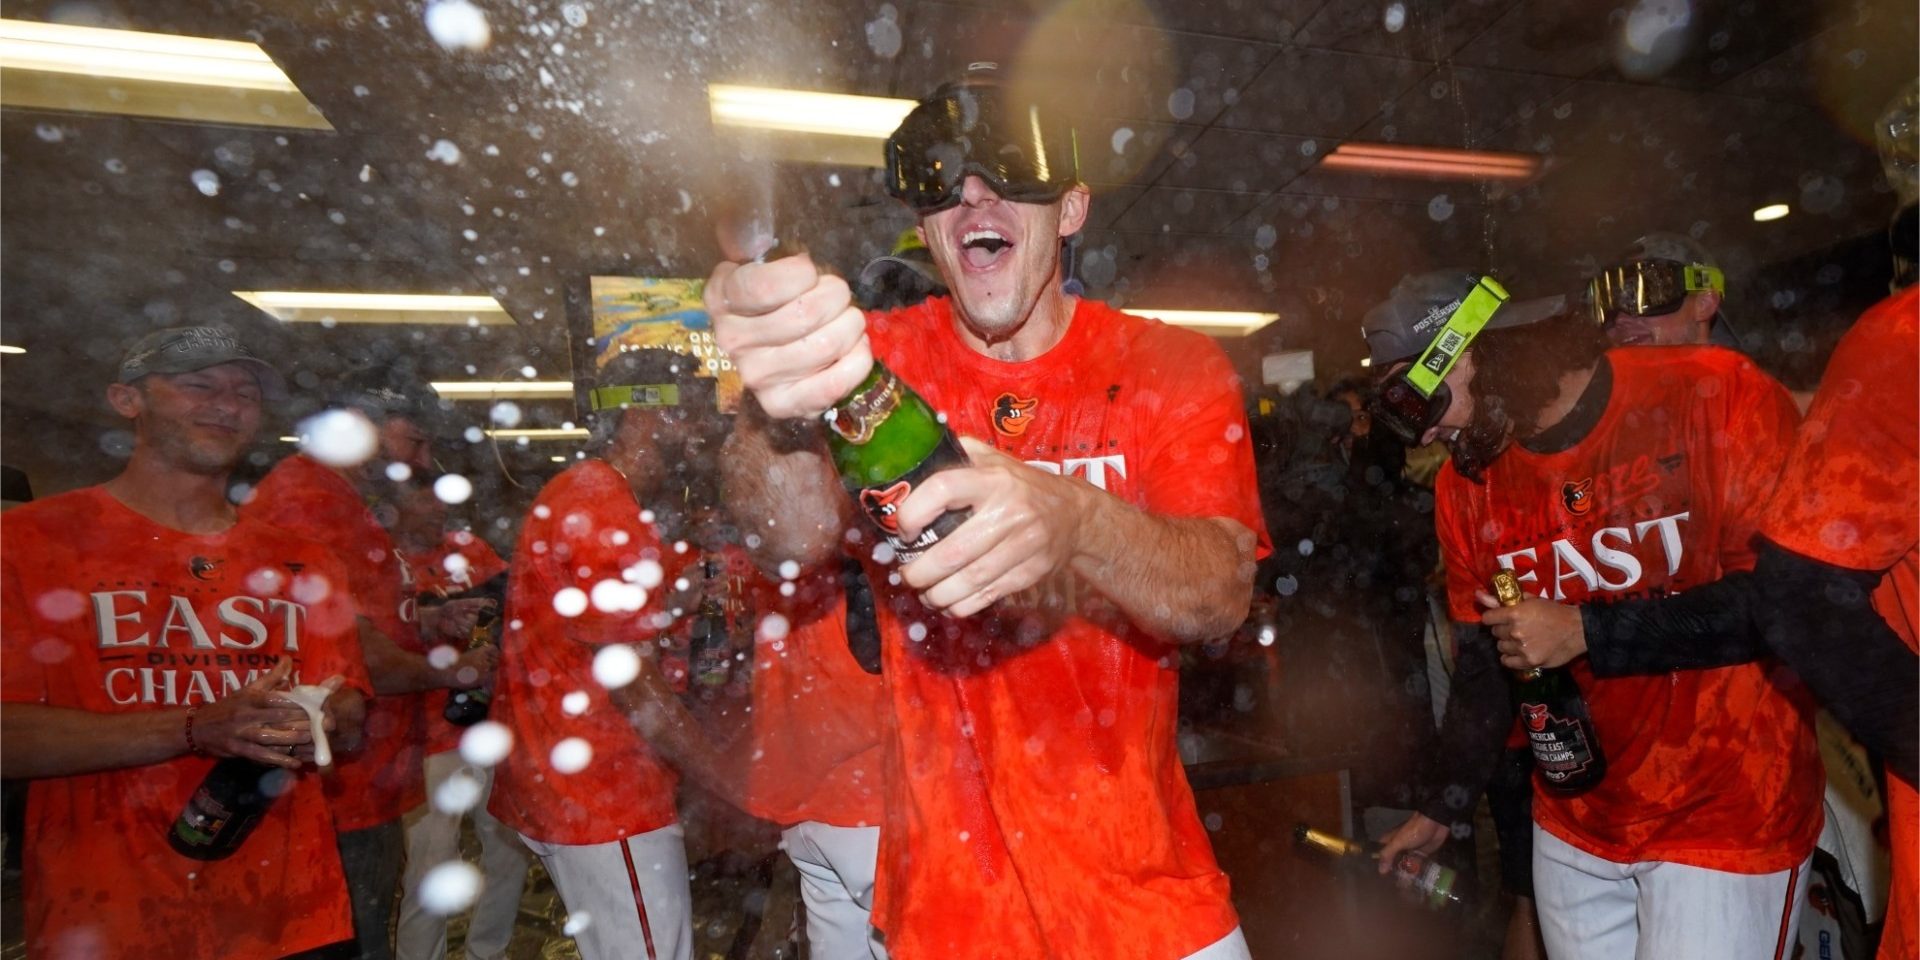 Orioles clinch AL East, secure top seed in celebratory night at Camden Yards